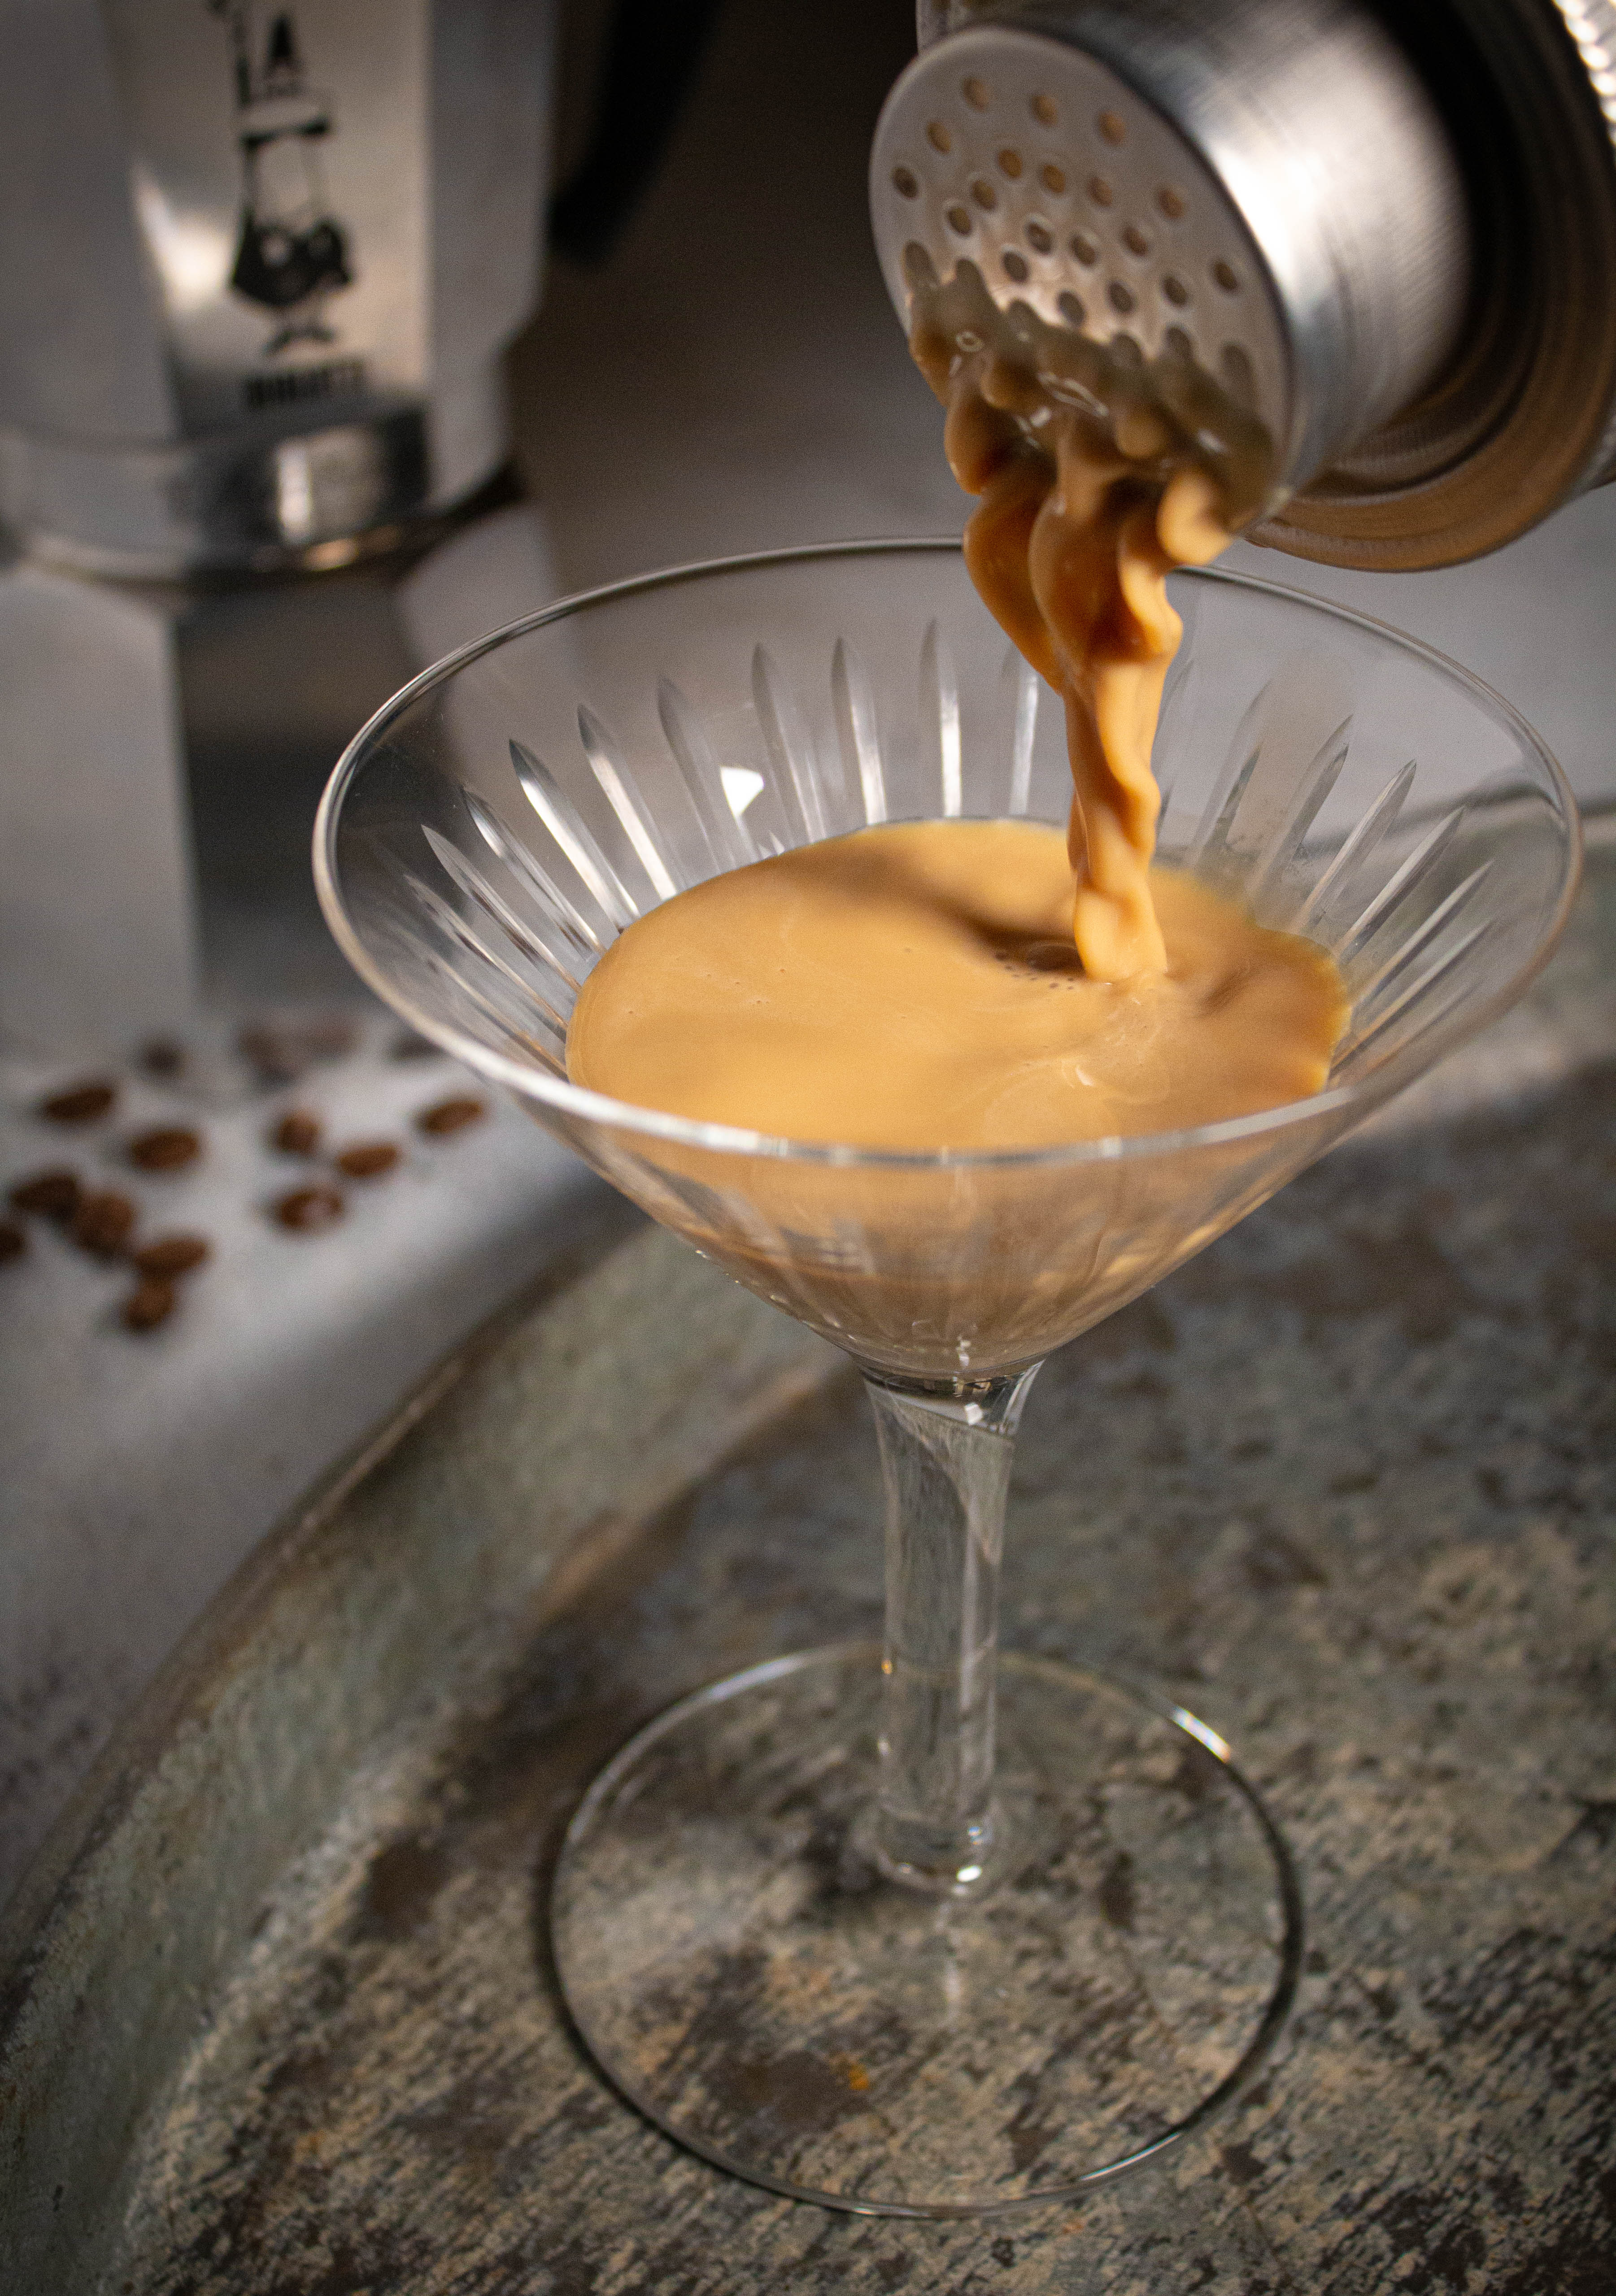 Espresso martini pouring out of brushed stainless steel cocktail shaker into a martini glass with mocha pot and espresso beans in the background.